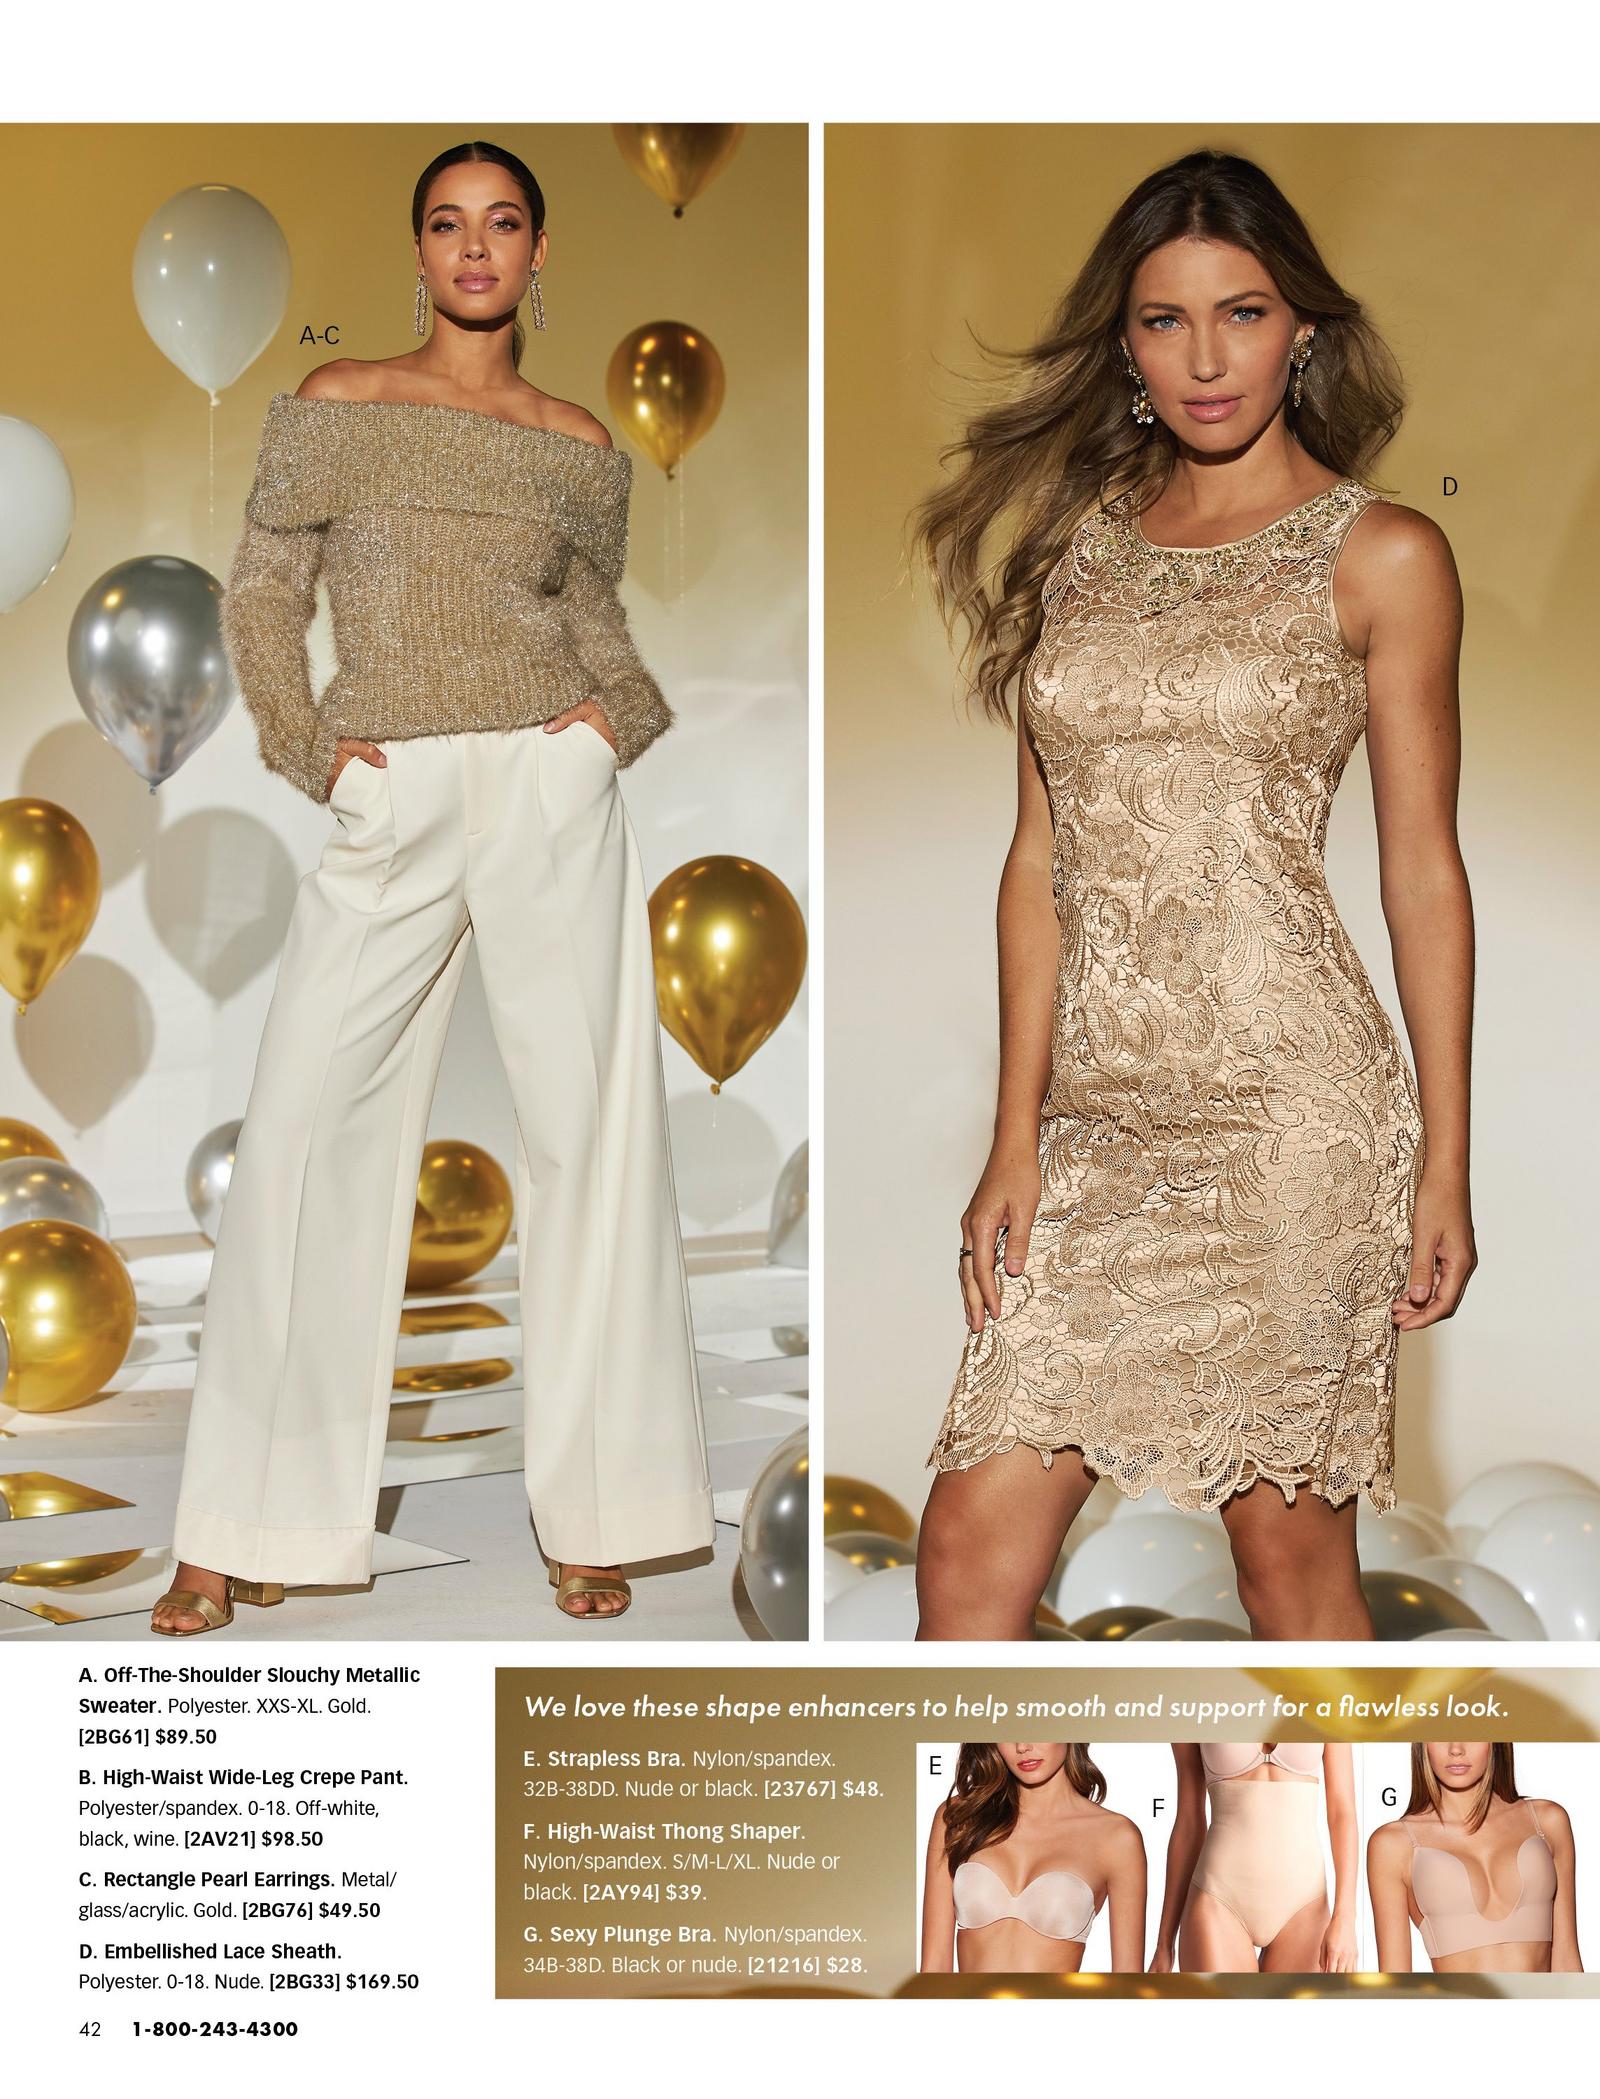 left model wearing a shimmery tan off-the-shoulder sweater, pearl rectangle earrings, and white wide-leg pants. right model wearing a gold lace sleeveless dress. bottom panel shows nude shapewear.